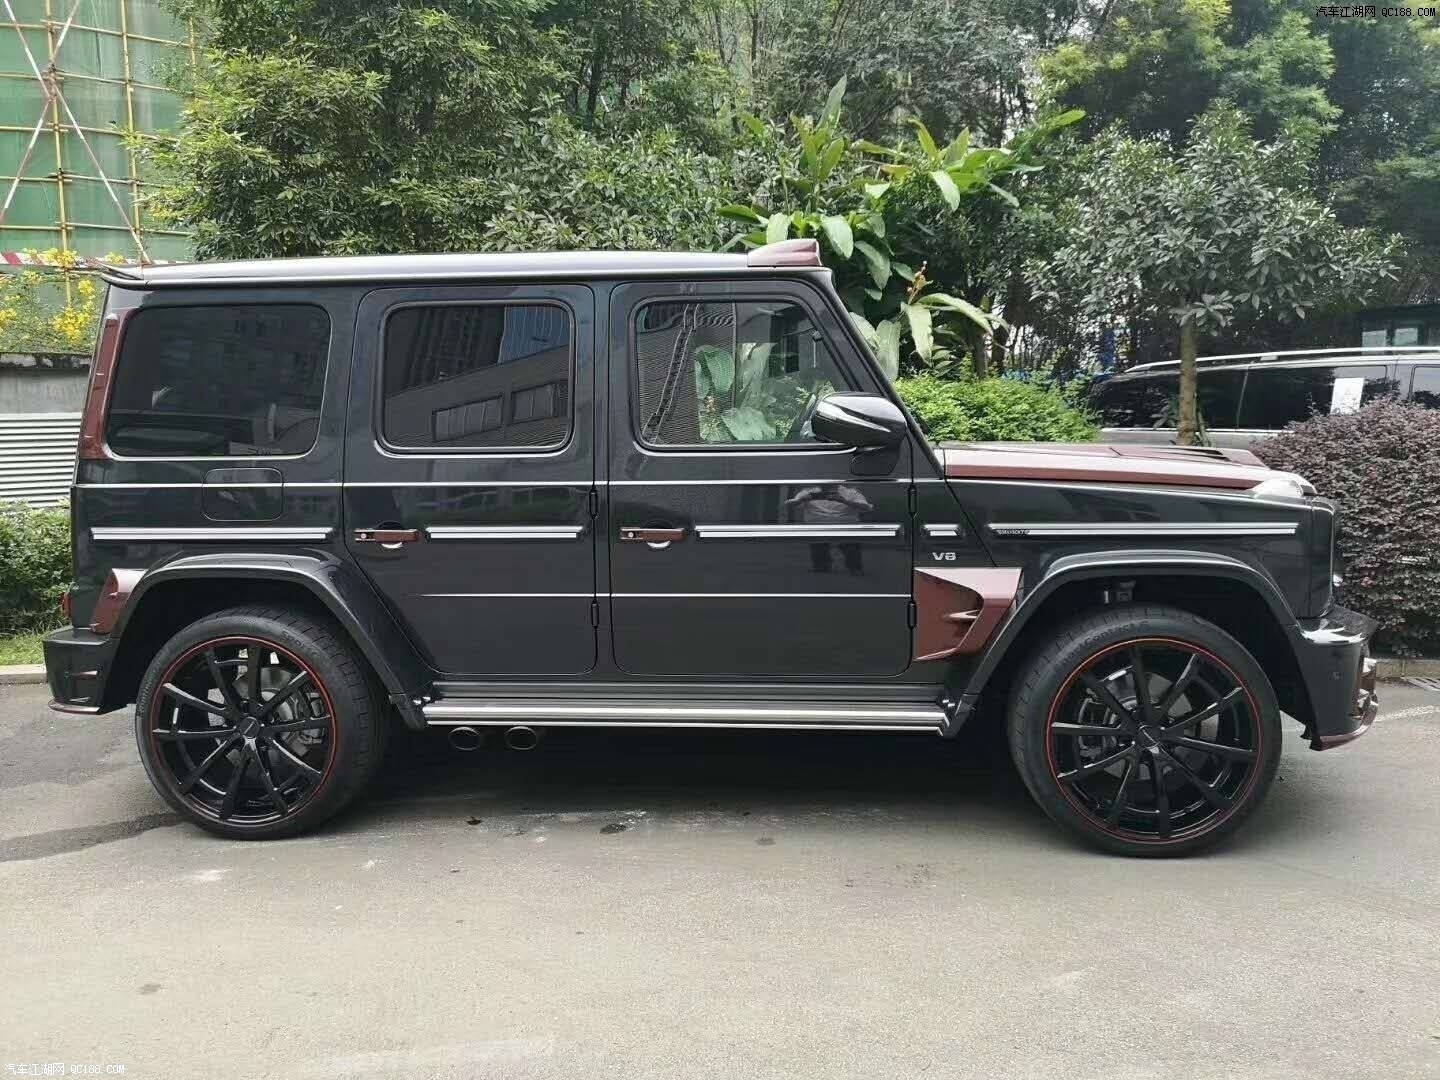 2020ڼӰ汼G63ϸ